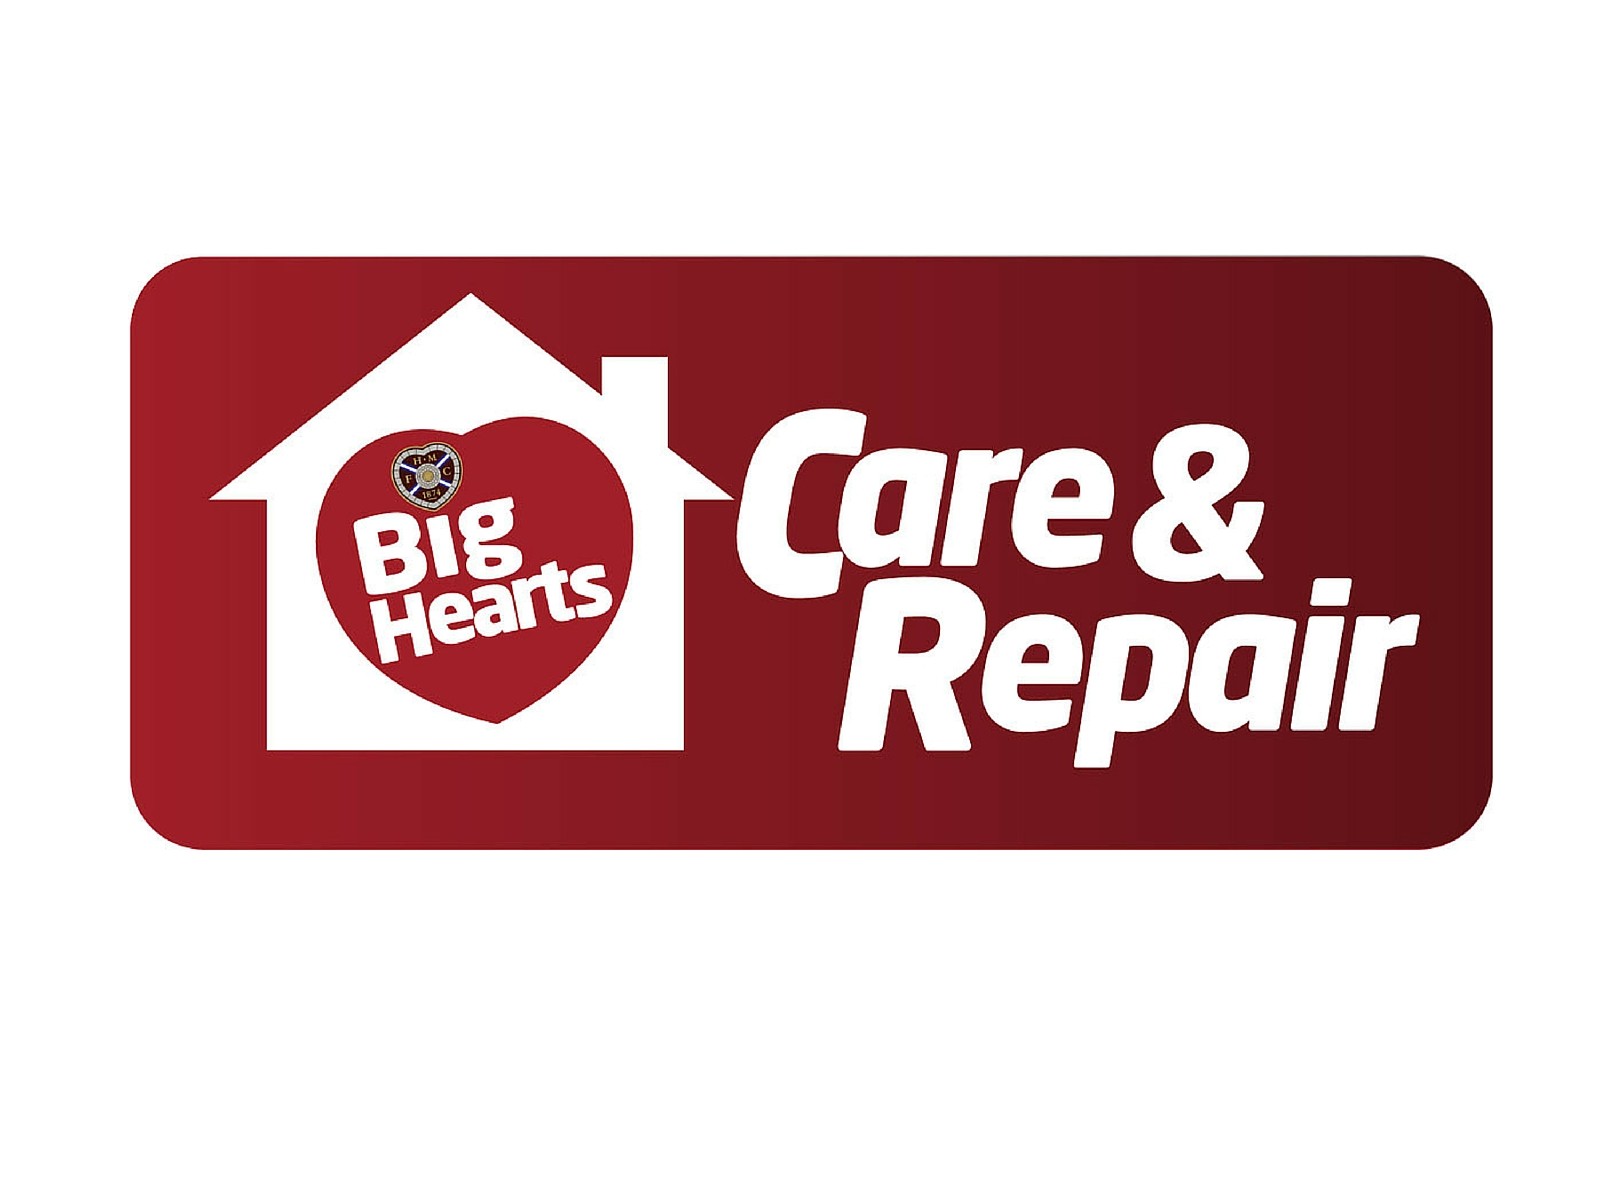  » Join Our Big Hearts Care & Repair Team!